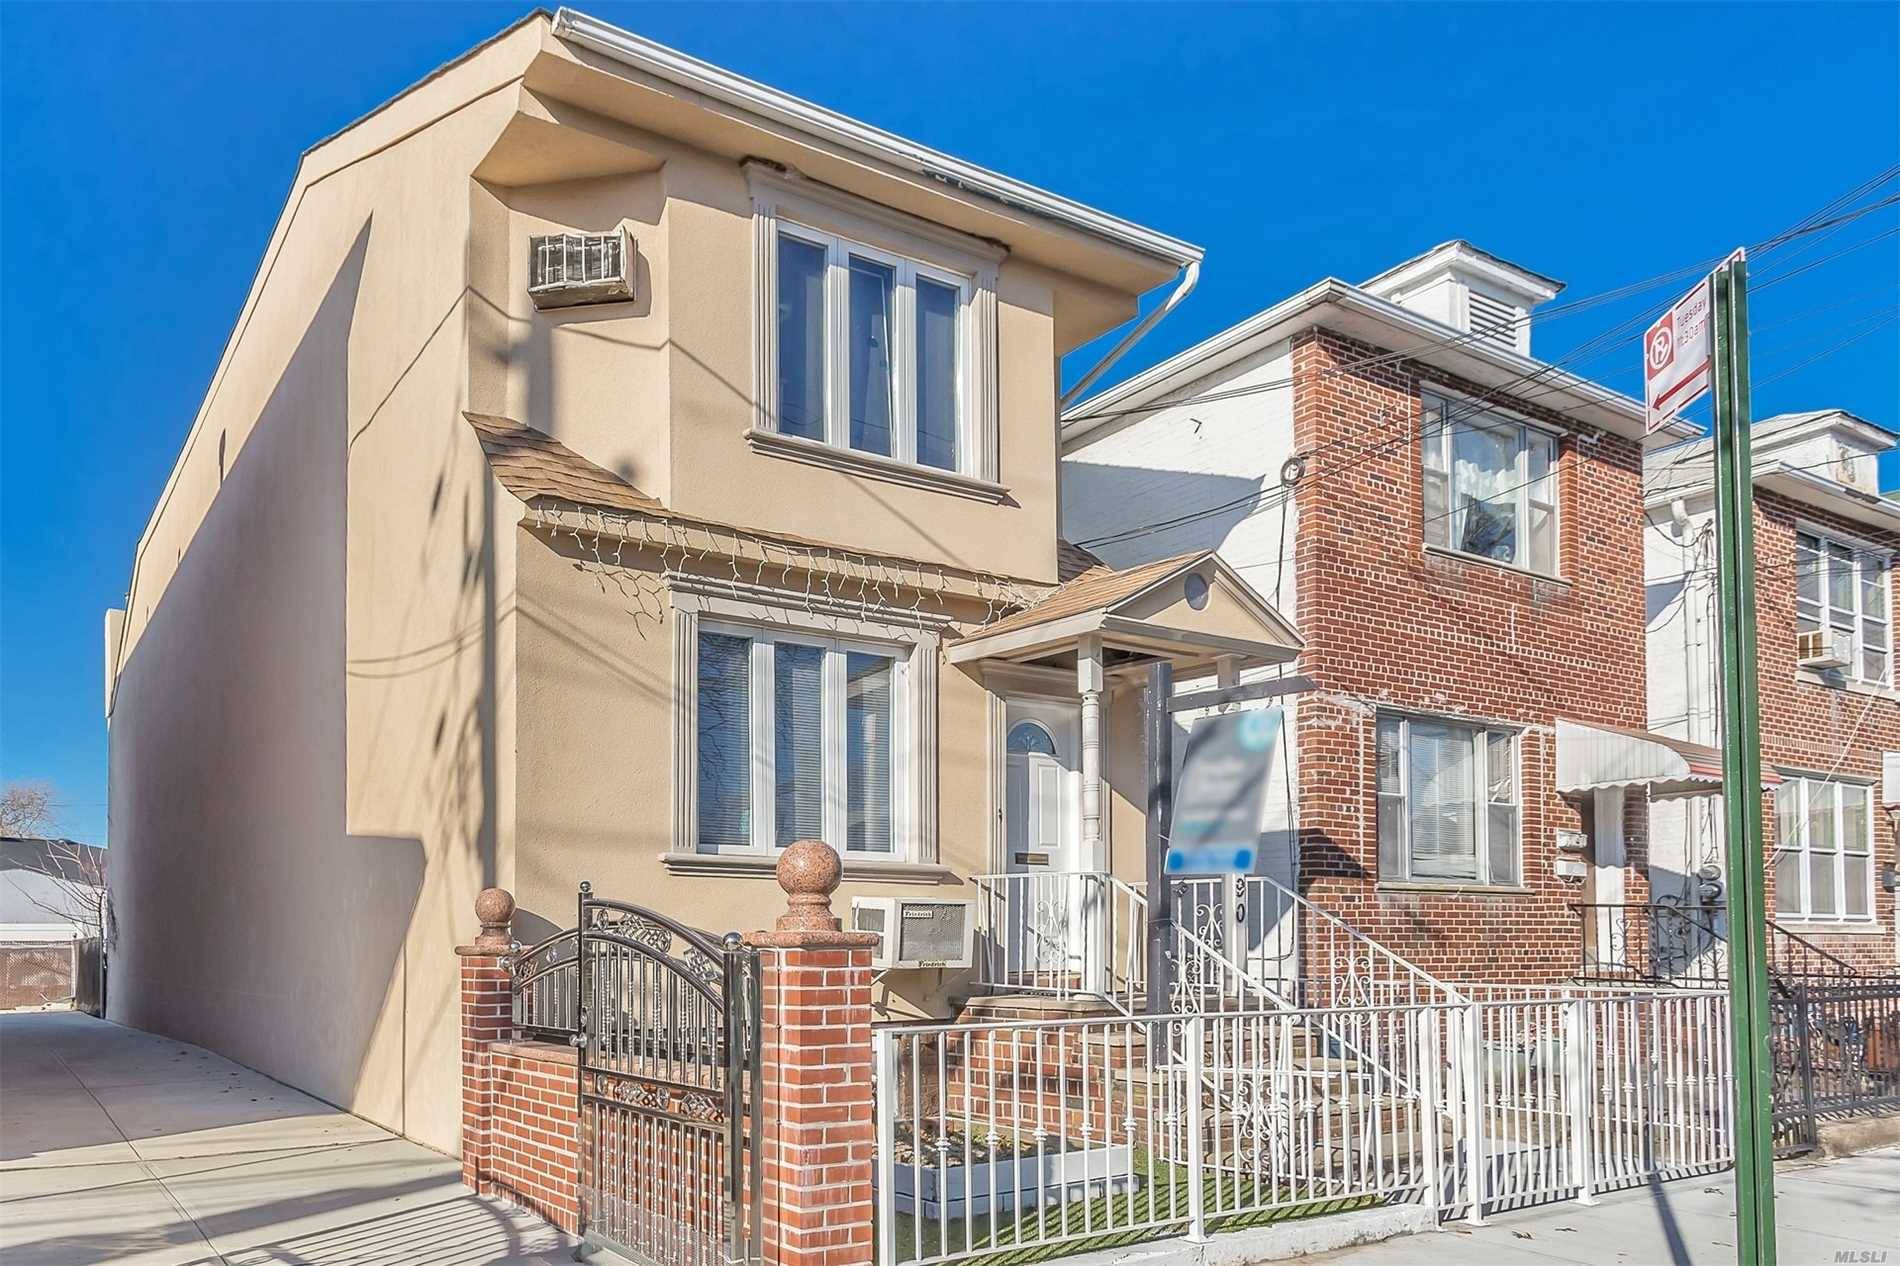 Detached Legal 2 Family For Sale In Gravesend, Brooklyn.